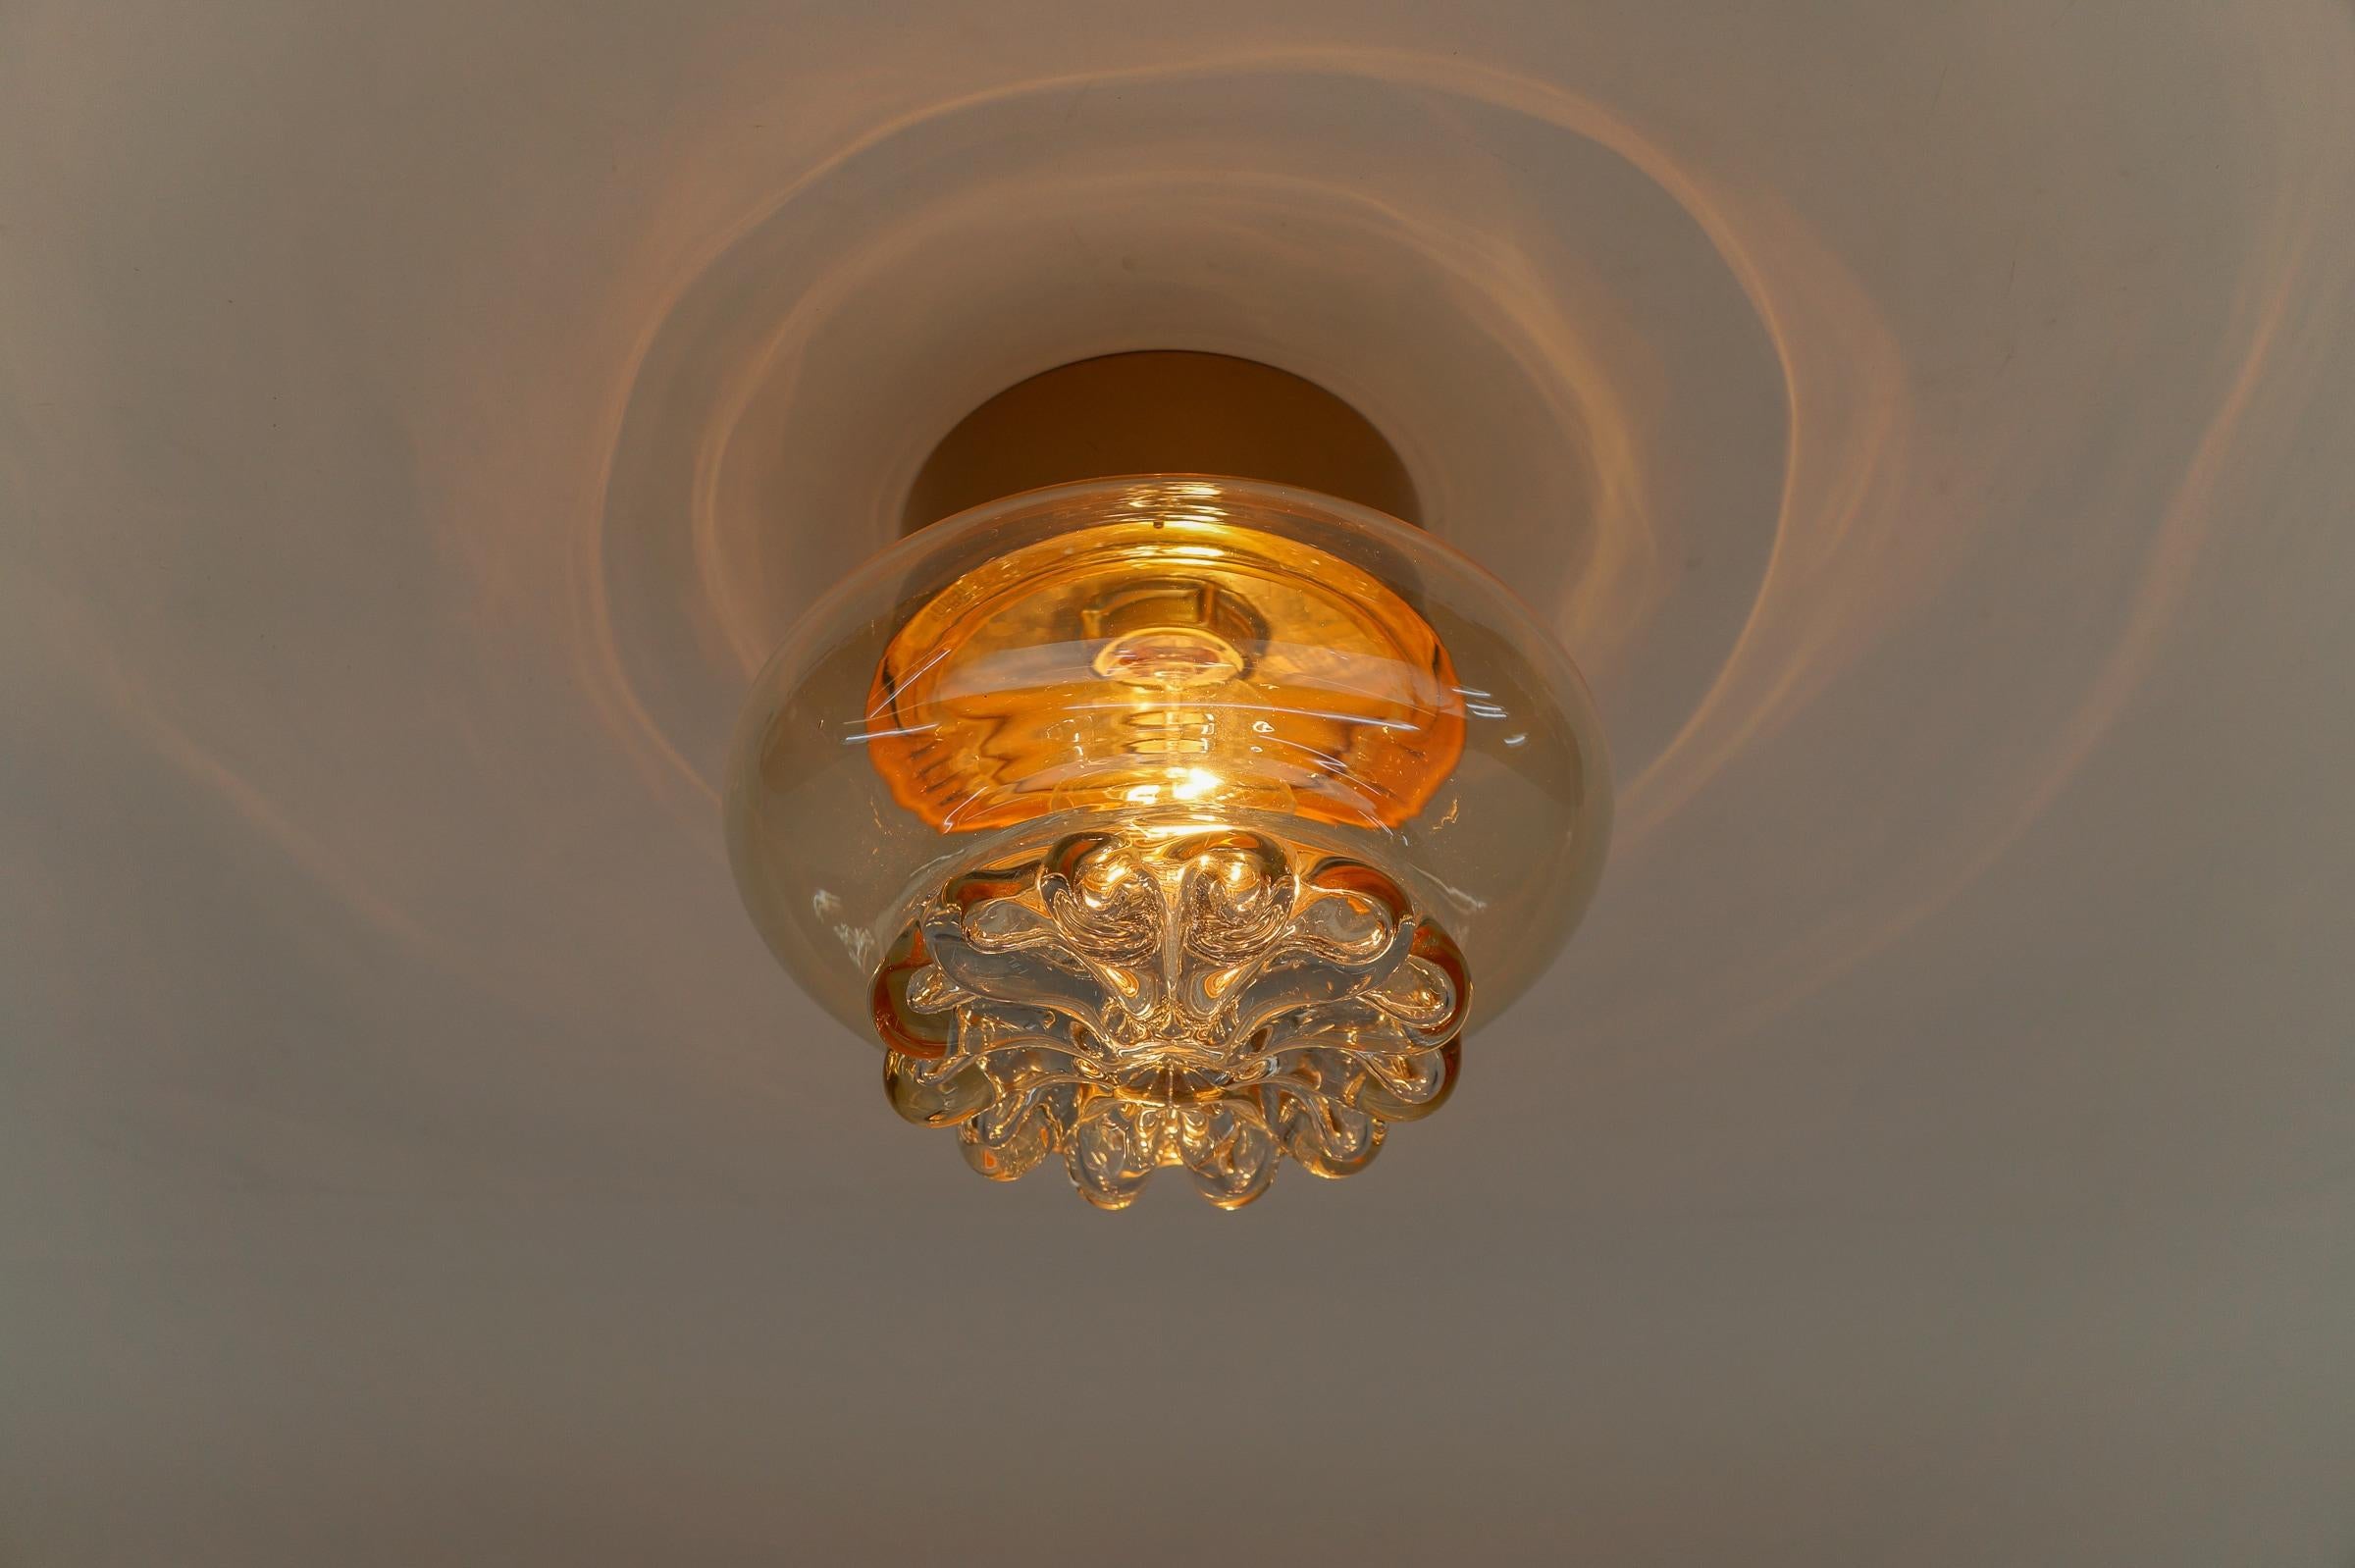 Elegant Amber Glass Flush Mount by Limburg, Germany 1960s

Dimensions
Height: 7.08 in. (18 cm)
Diameter: 8.66 in. (22 cm)

The fixture need 1 x E27 standard bulb with 60W max.

Light bulbs are not included.
It is possible to install this fixture in